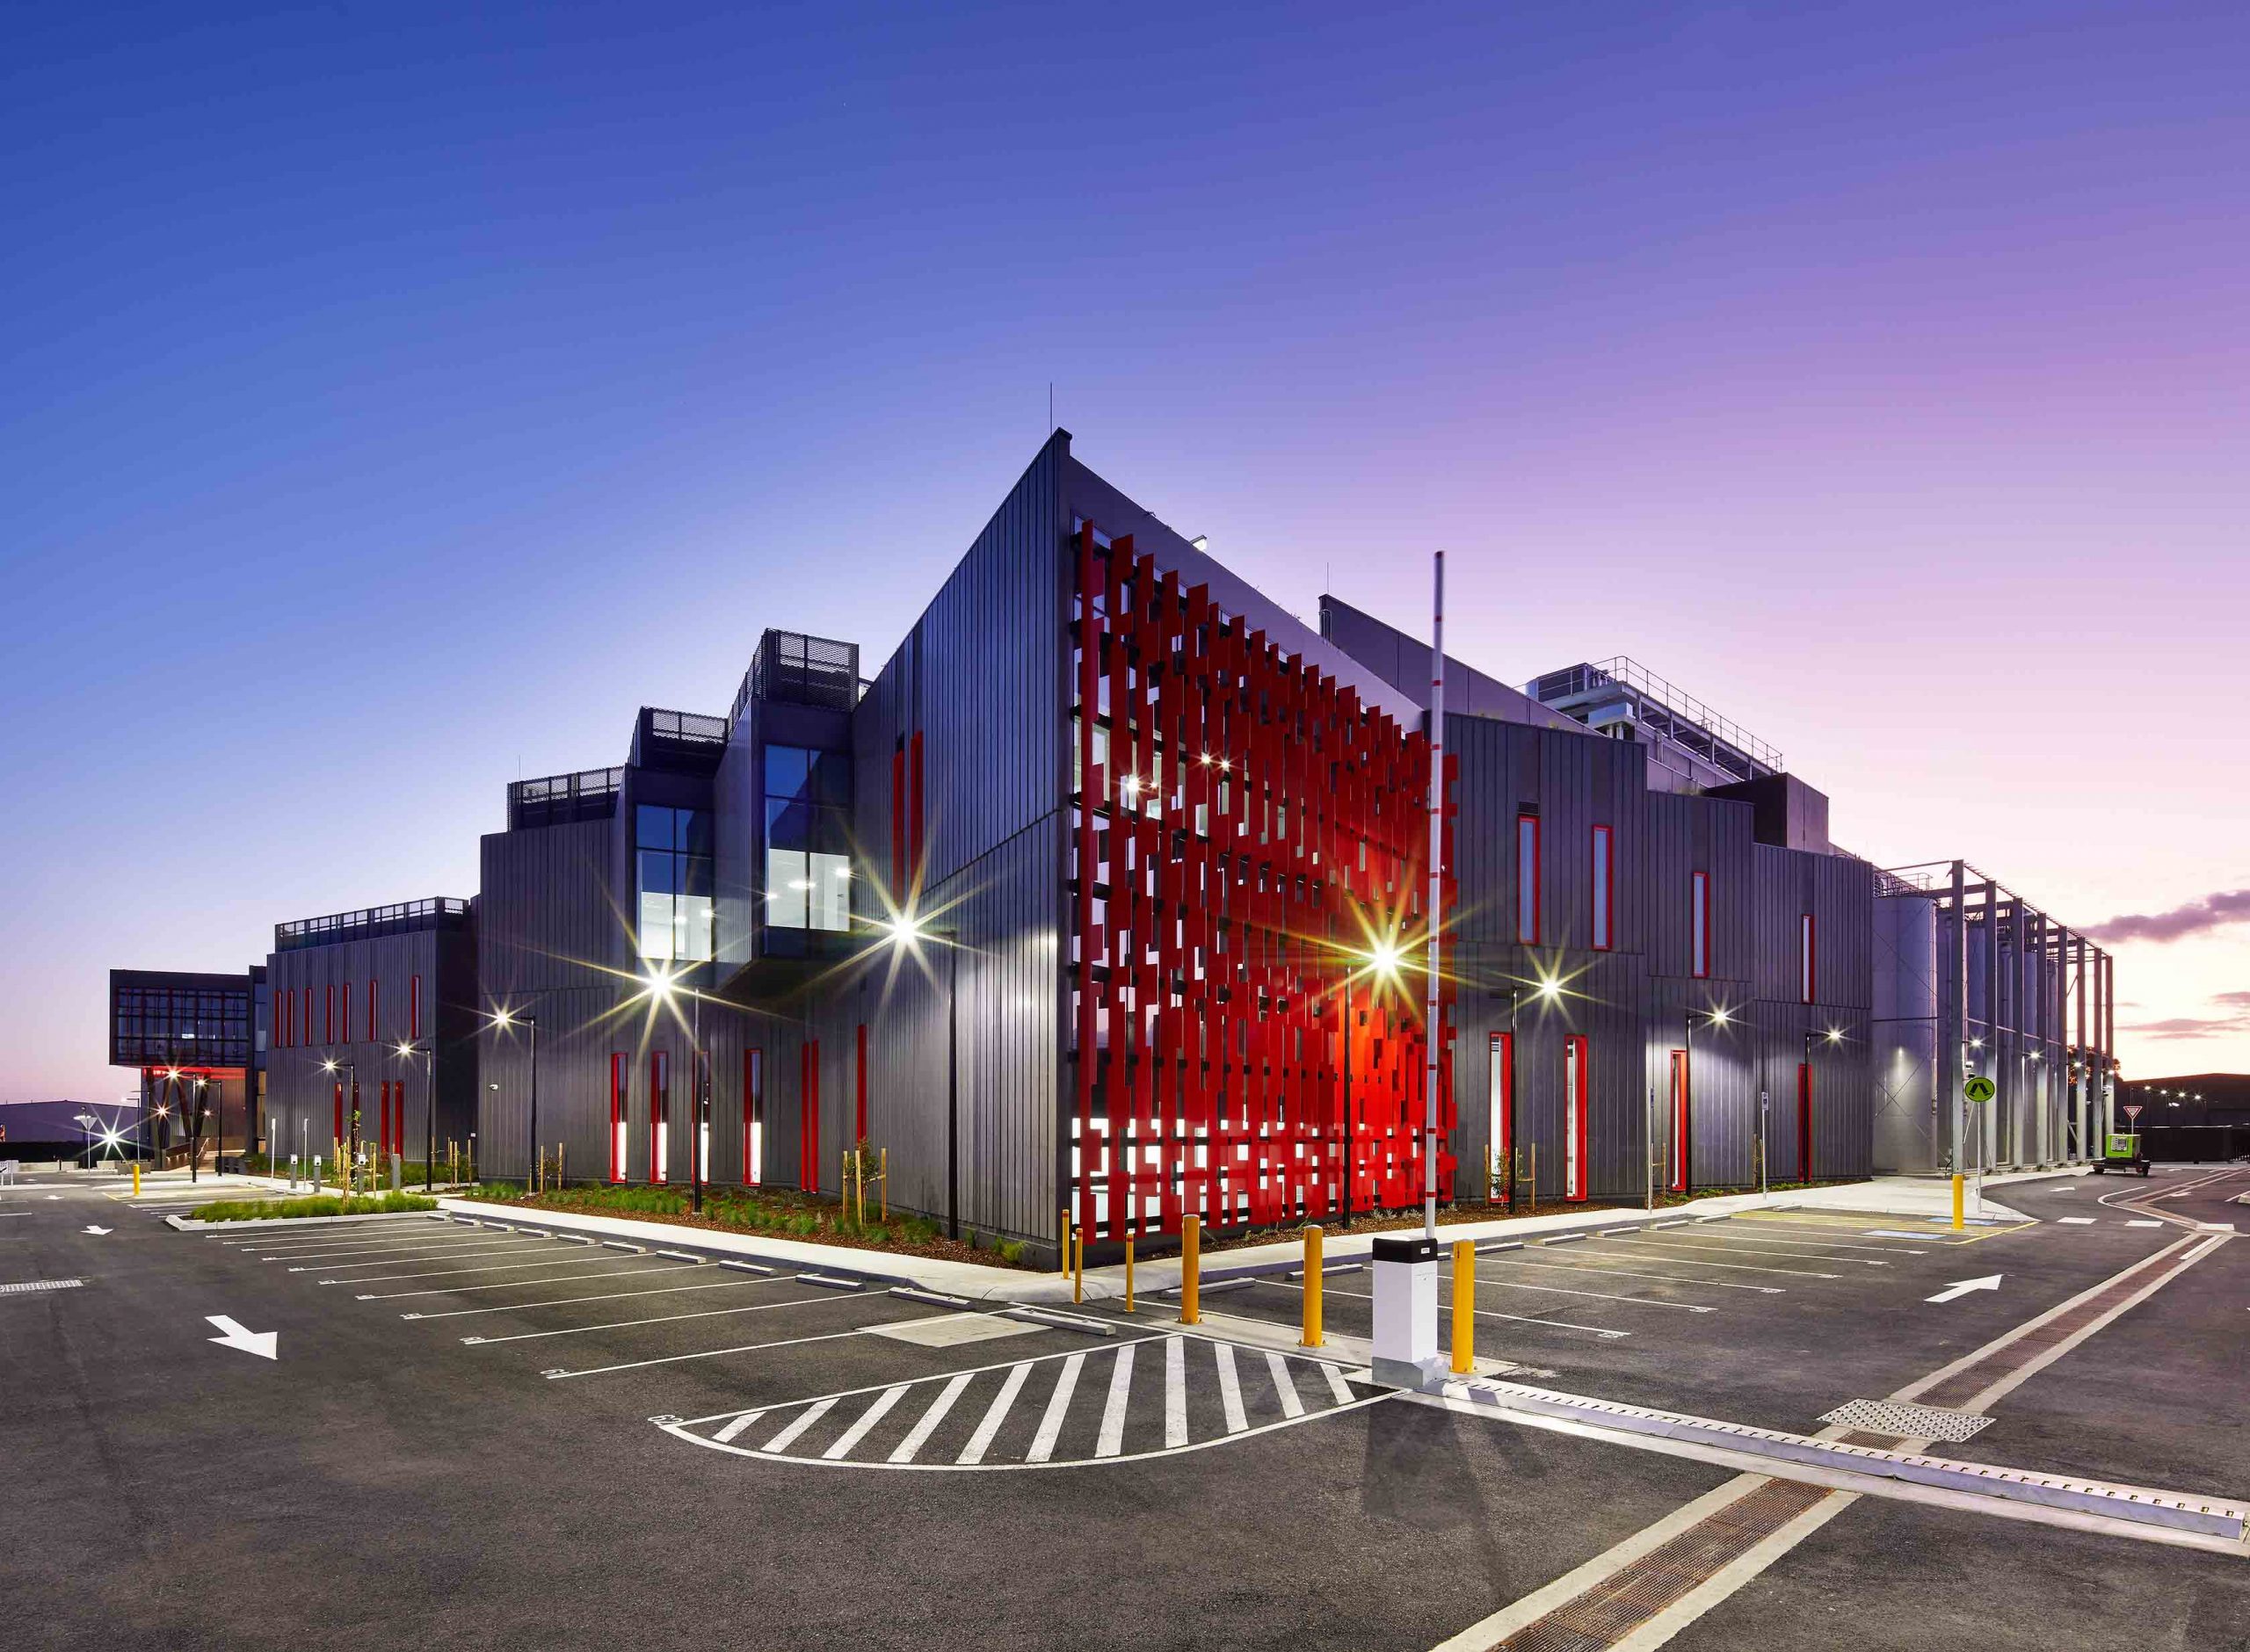 Exterior architecture photography of industrial data centre building.